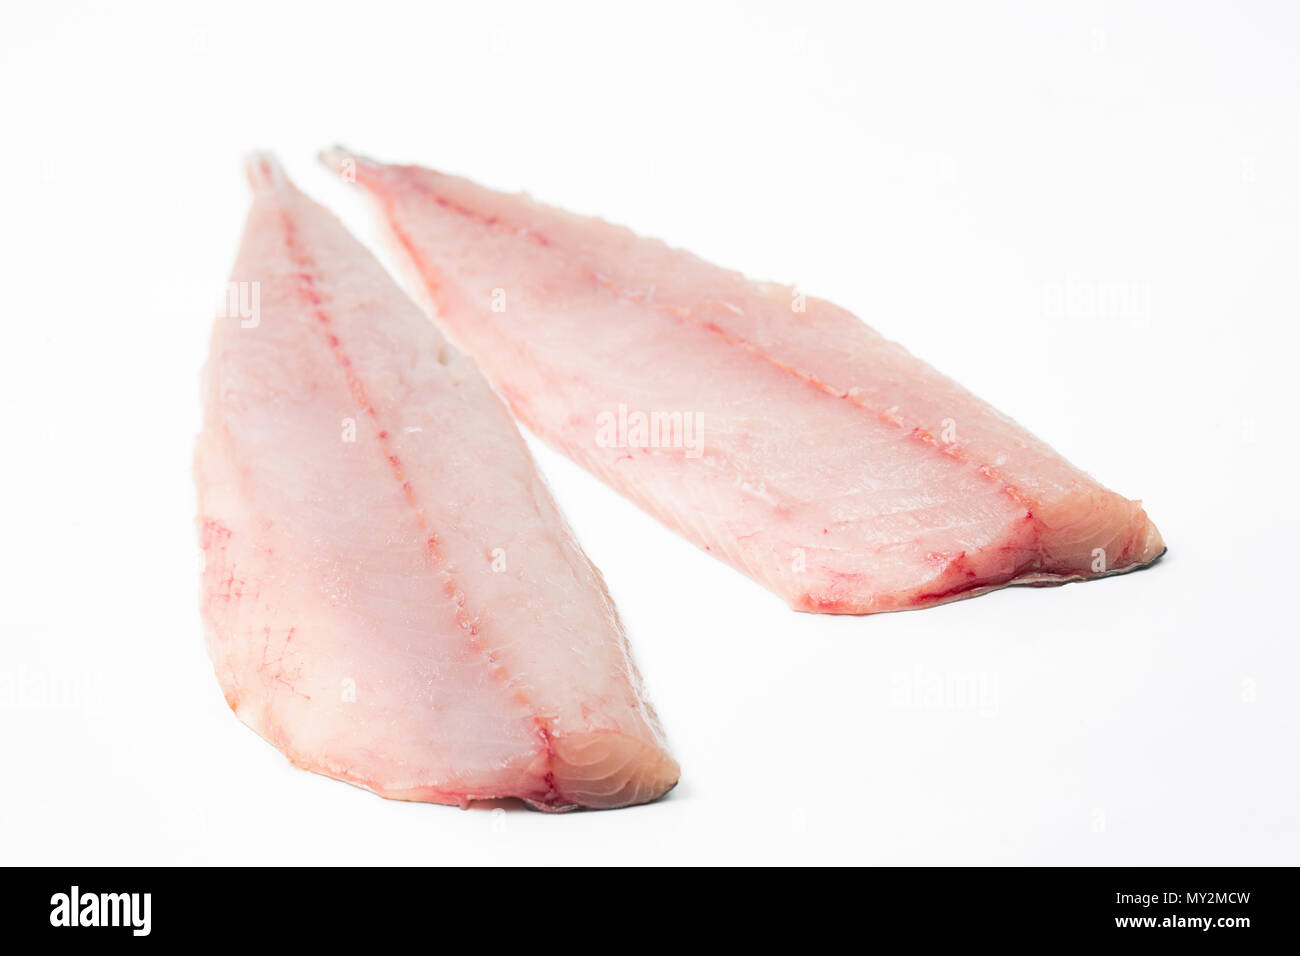 Two fresh, raw mackerel fillets, S. scombrus, on a white background from a mackerel caught from Chesil beach on rod and line. Dorset England UK GB Stock Photo